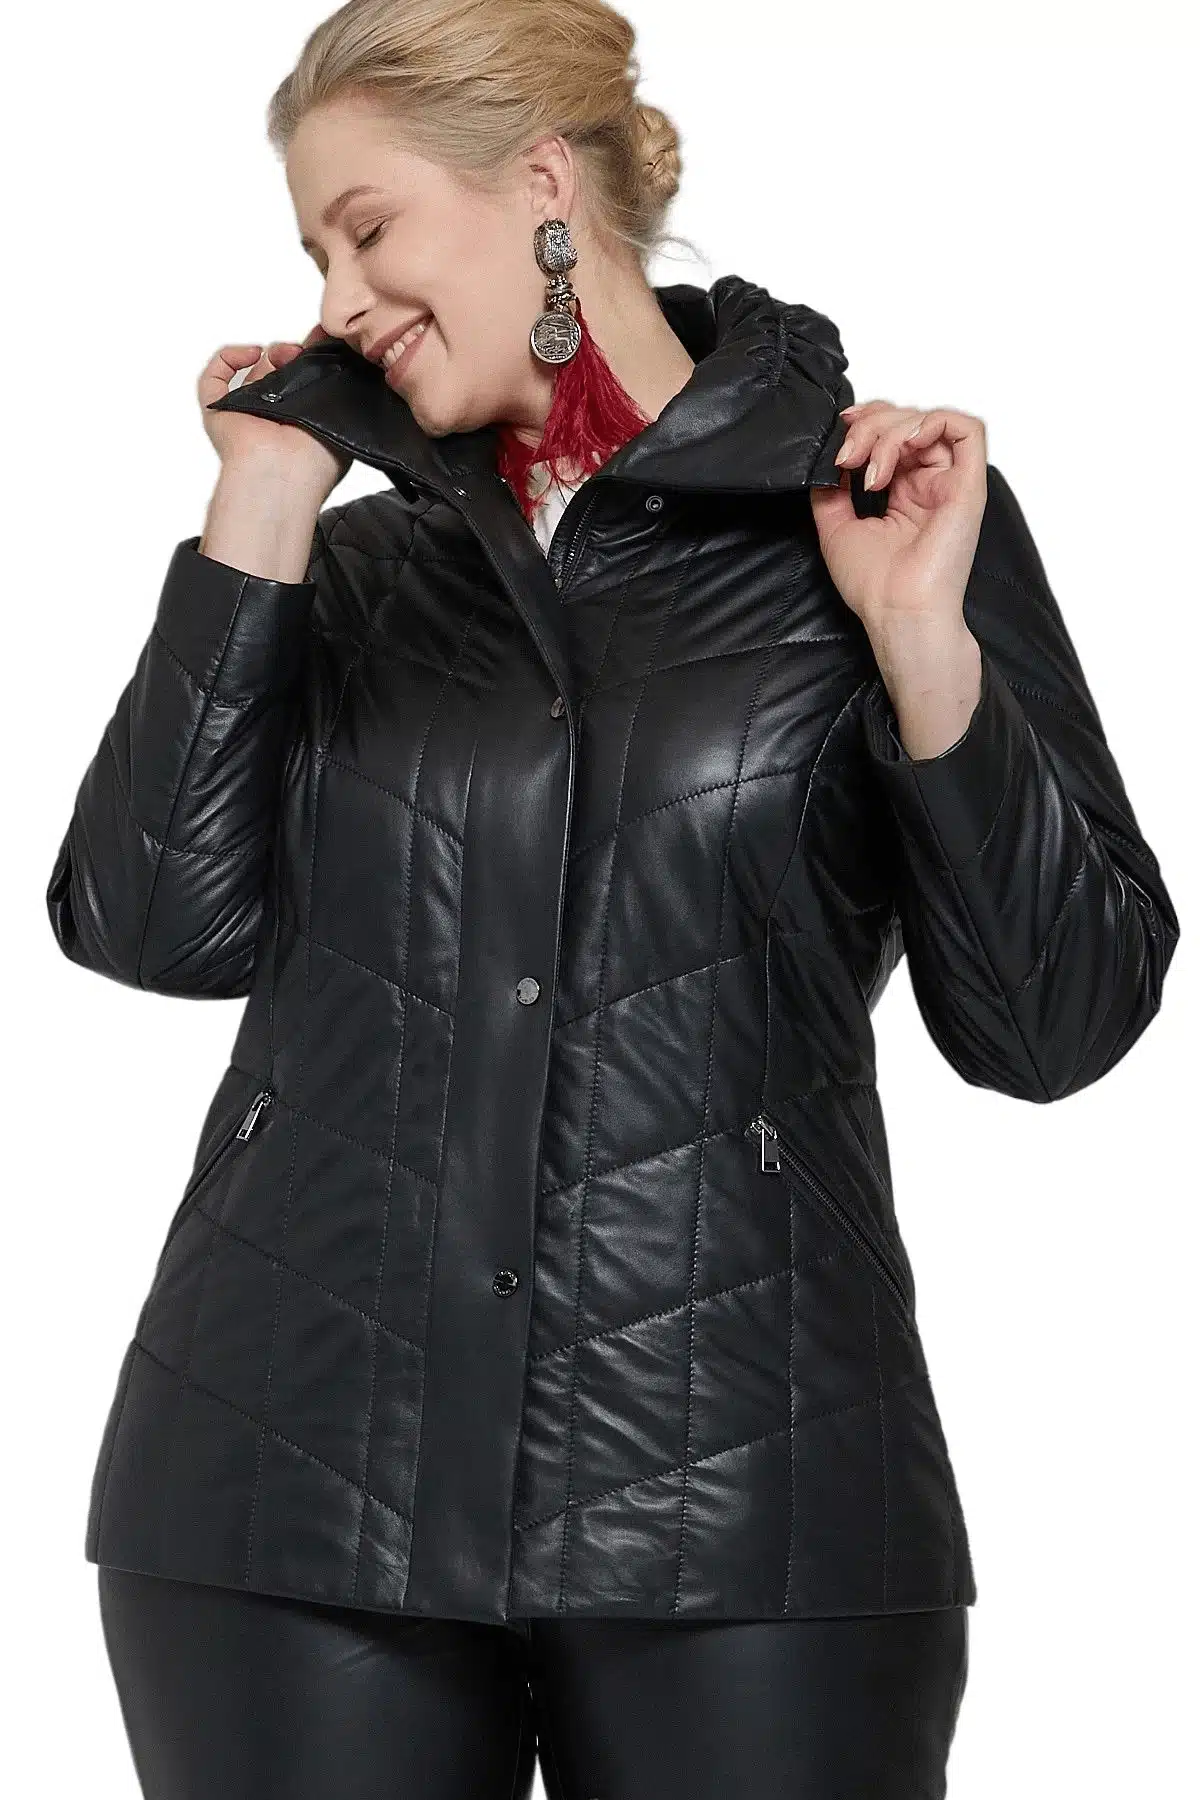 Stylish Women’s Leather Jacket in Black (6)_result